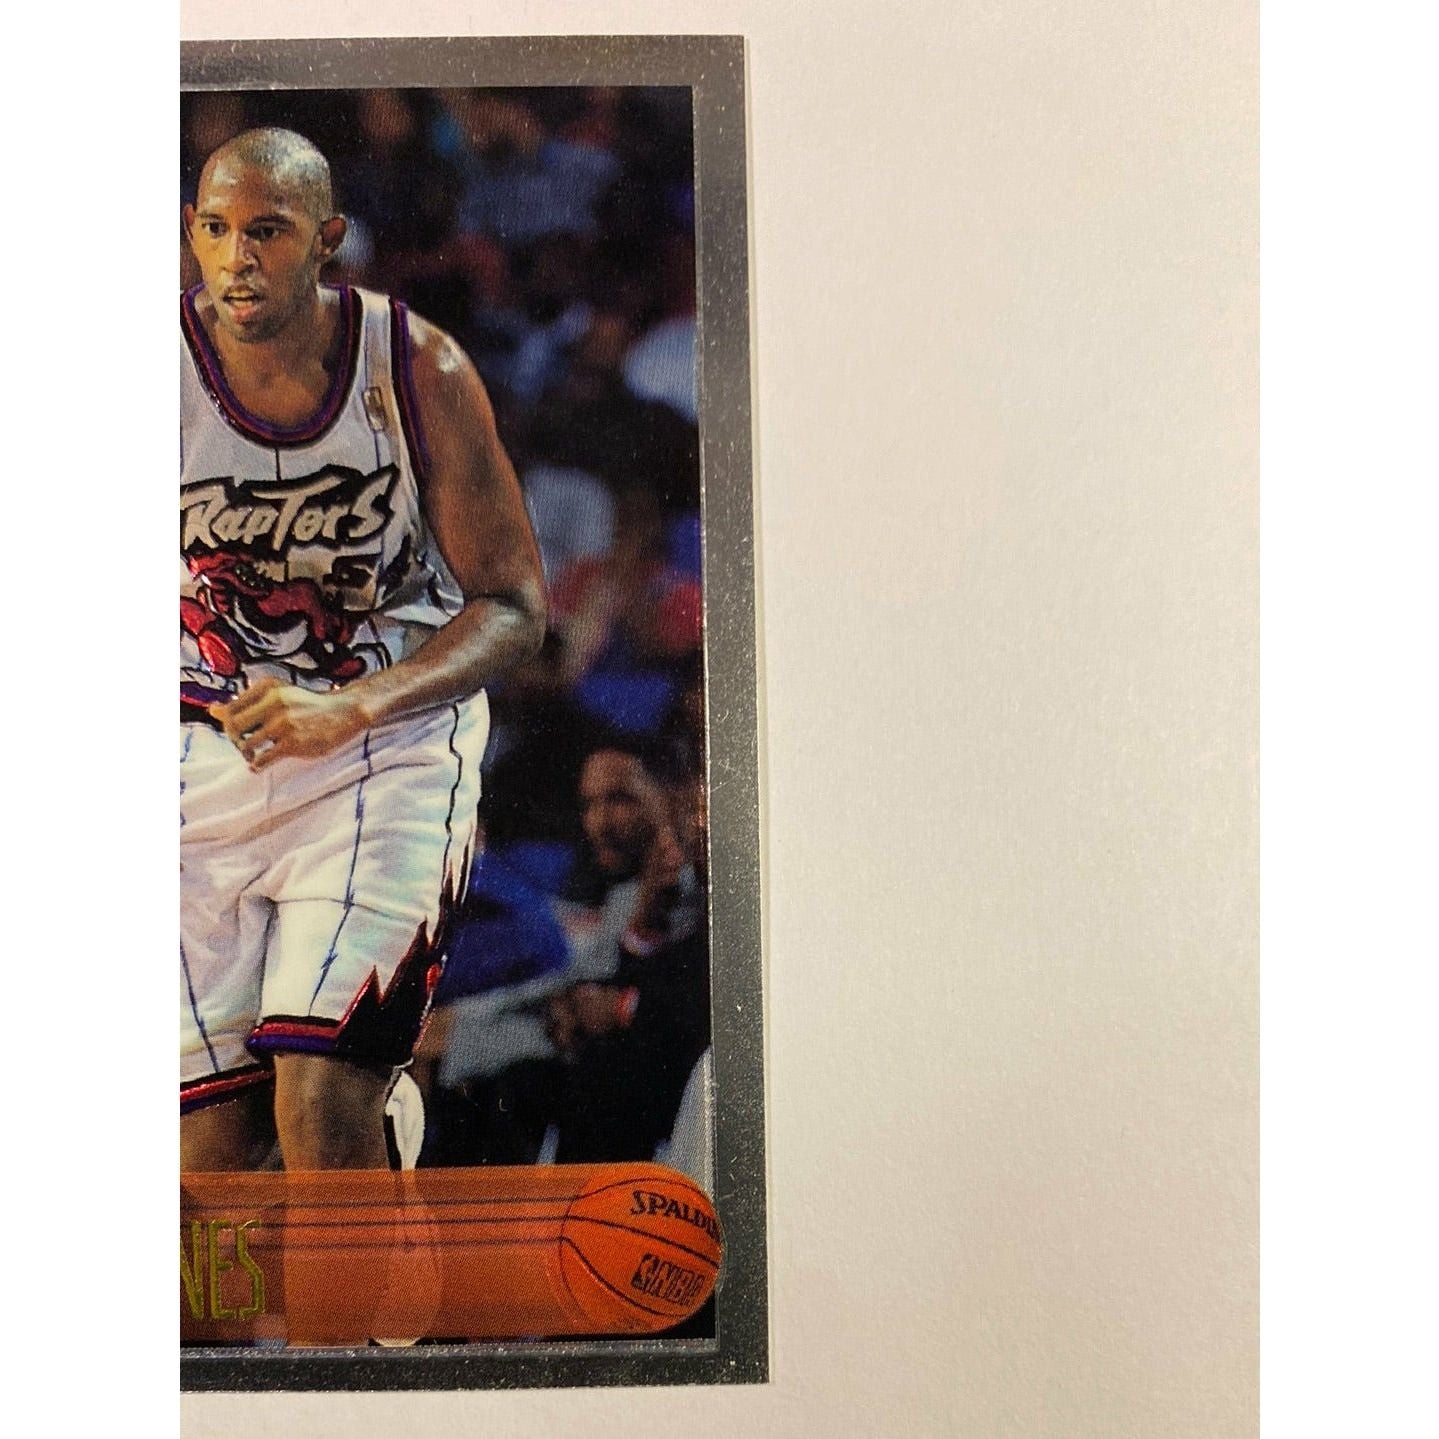  1996-97 Topps Chrome Popeye Jones  Local Legends Cards & Collectibles